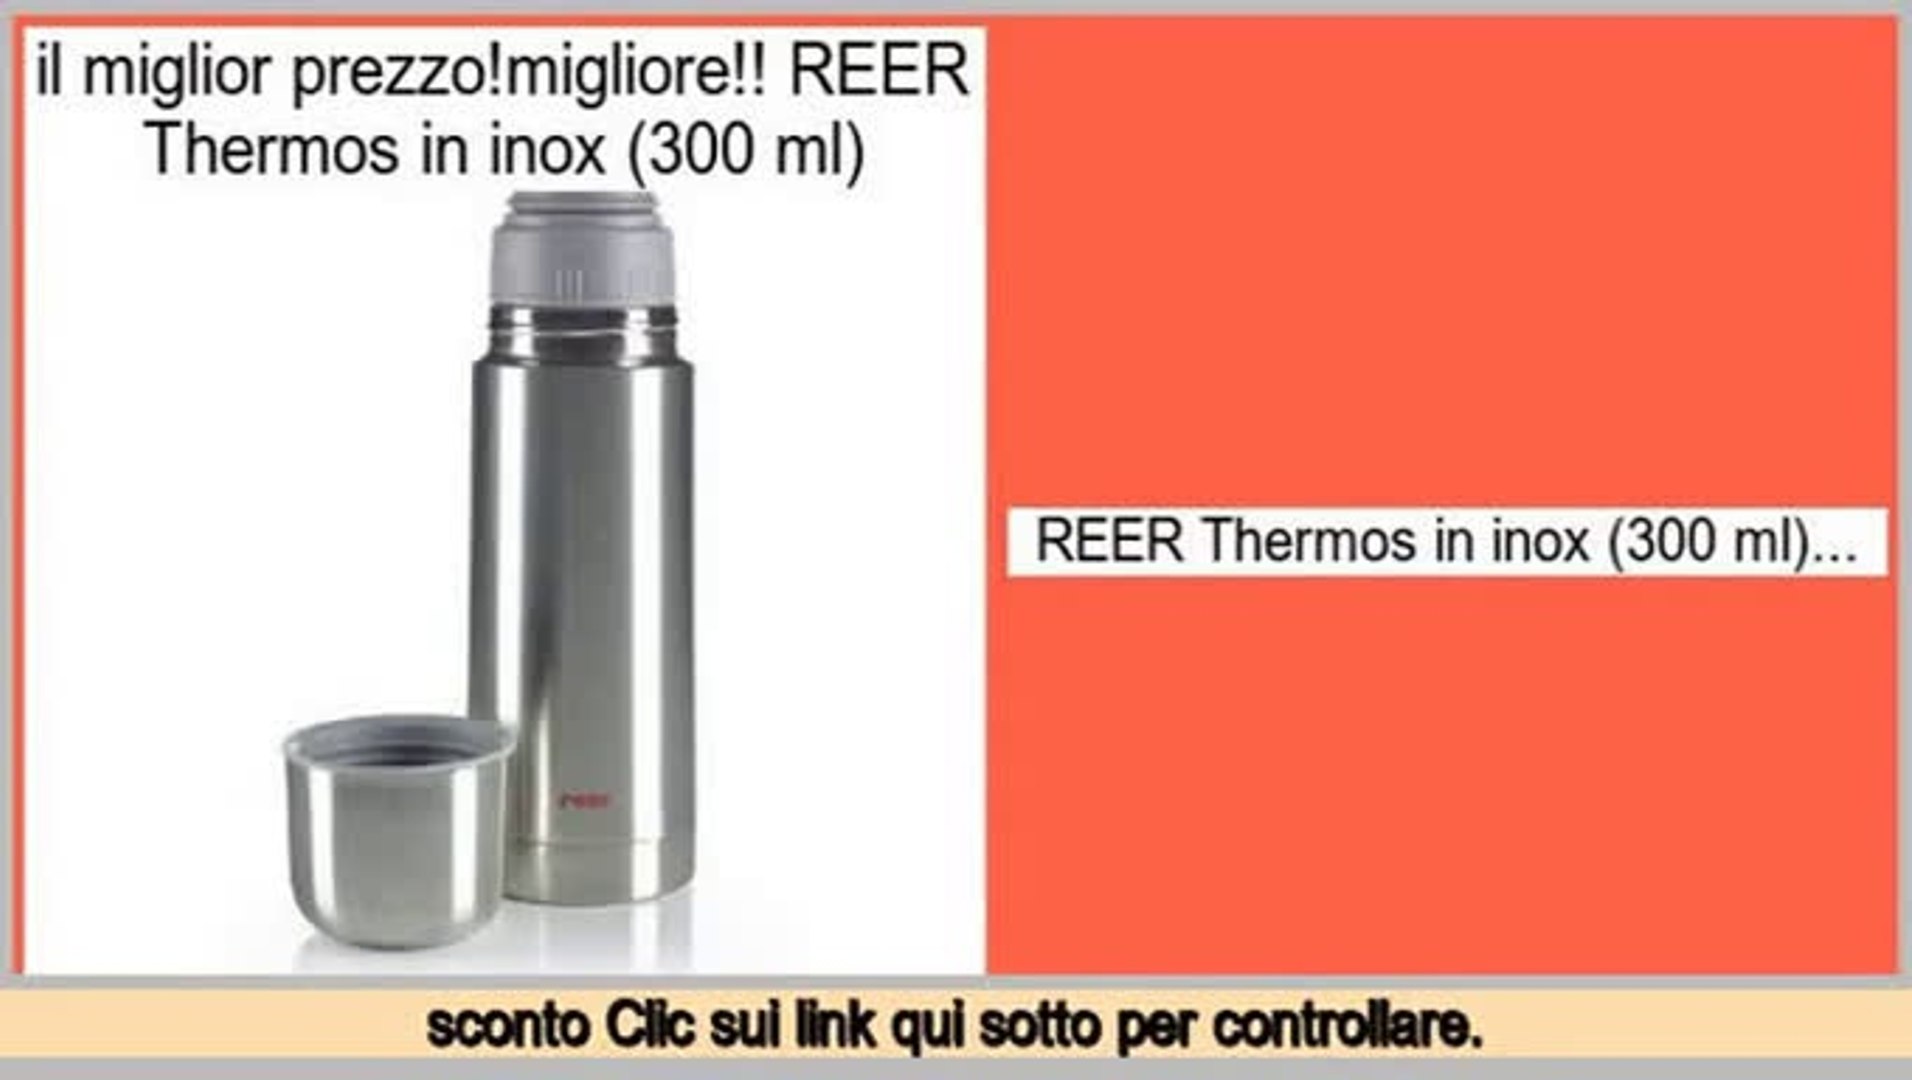 confronto REER Thermos in inox (300 ml) - video Dailymotion